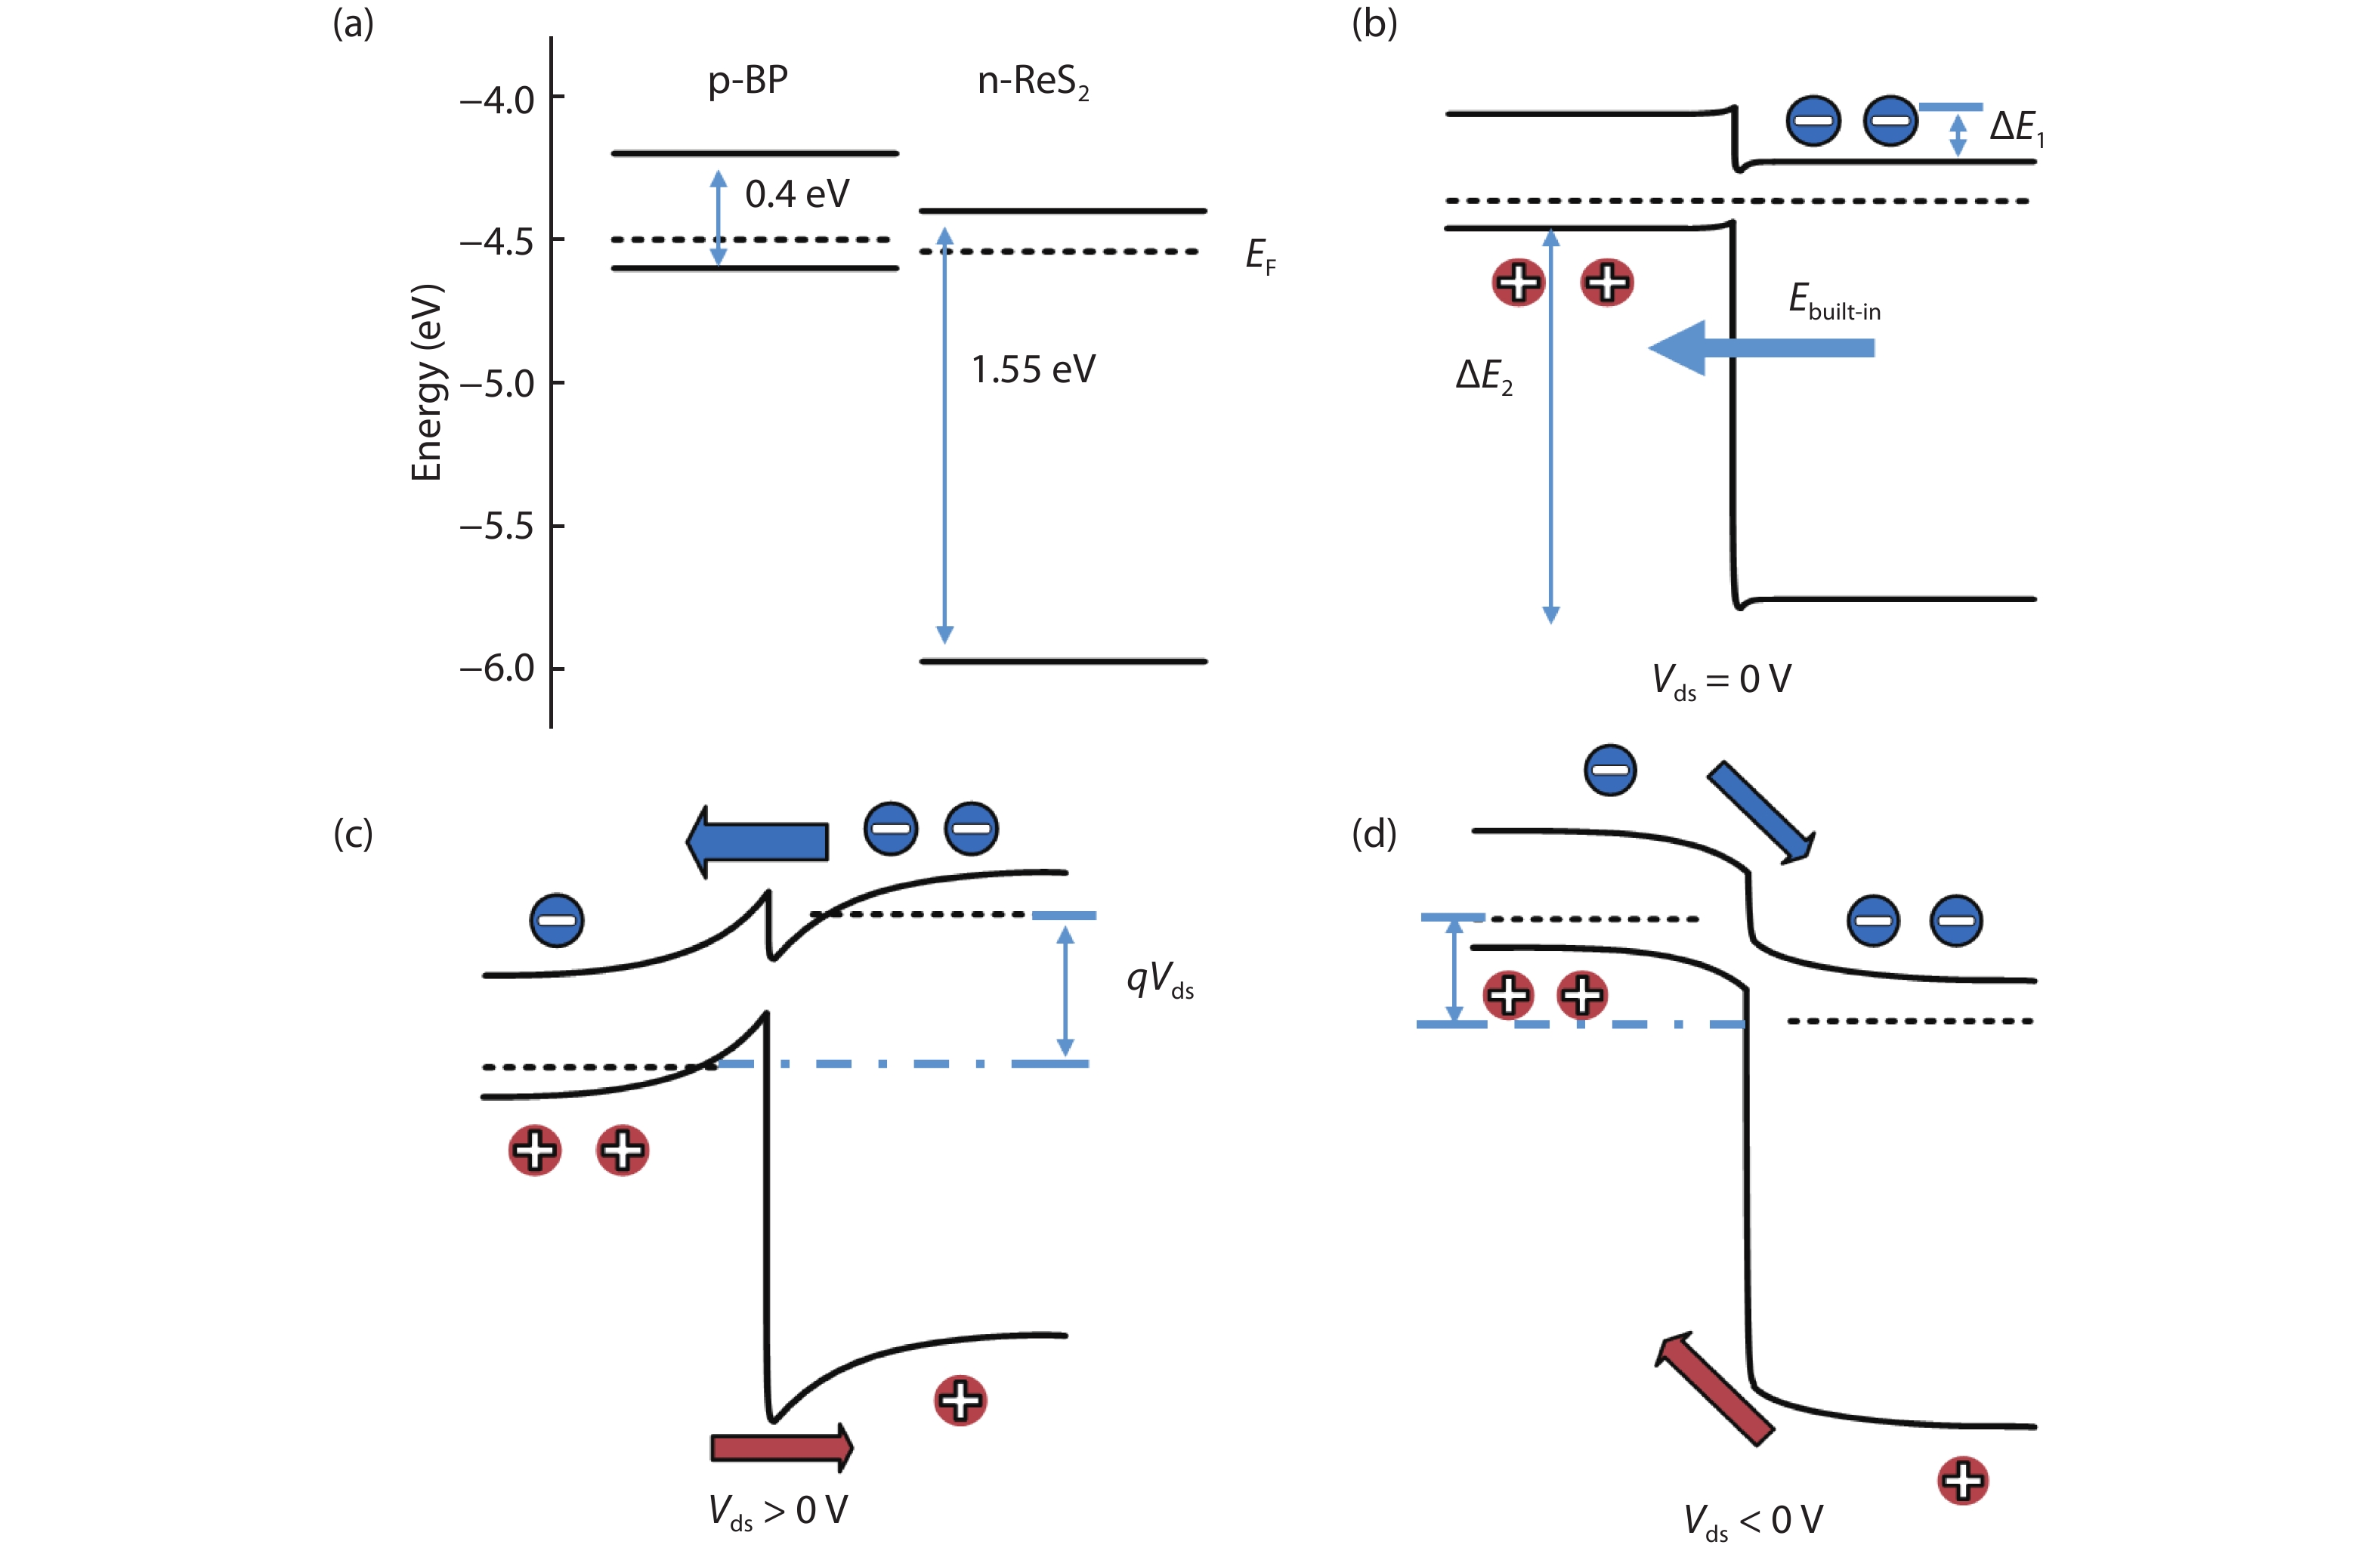 (Color online) (a) Band alignment for isolated p-BP and n-ReS2 layers. Electron affinities of BP and ReS2 are around 4.2 and 4.4 eV, respectively. (b–d) schematic band diagrams at the interface of the BP/ReS2 heterojunction at different applied voltages Vds ((b)zero bias, (c) positive bias and (d) negative bias). The transportation of electrons and holes are indicated by blue arrows and red arrows, respectively.